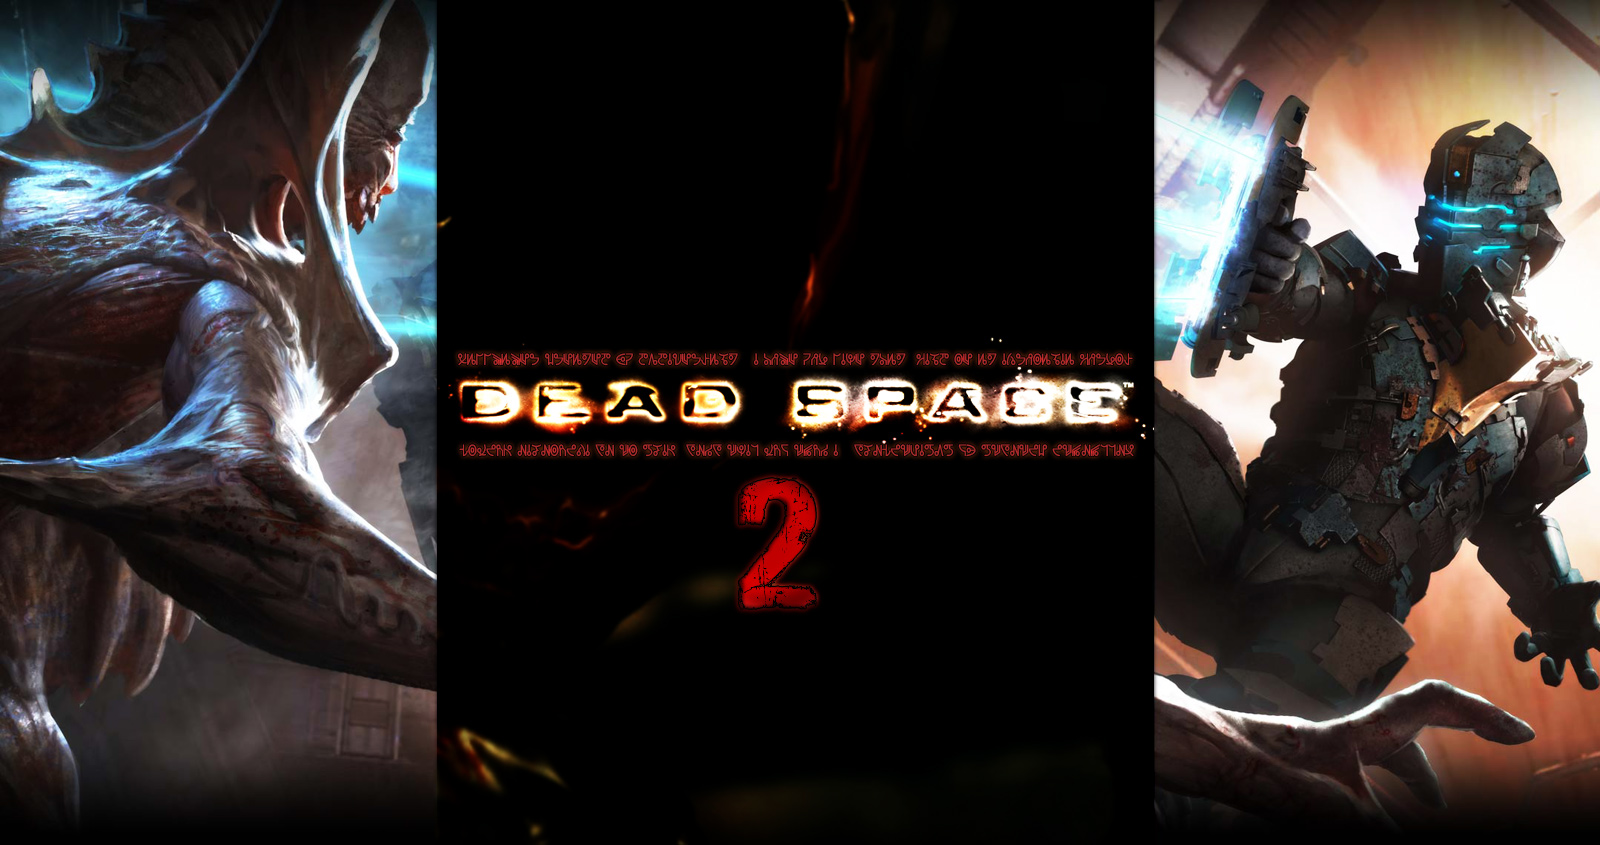 dead space 2 game wallpaper hd download games | View HD